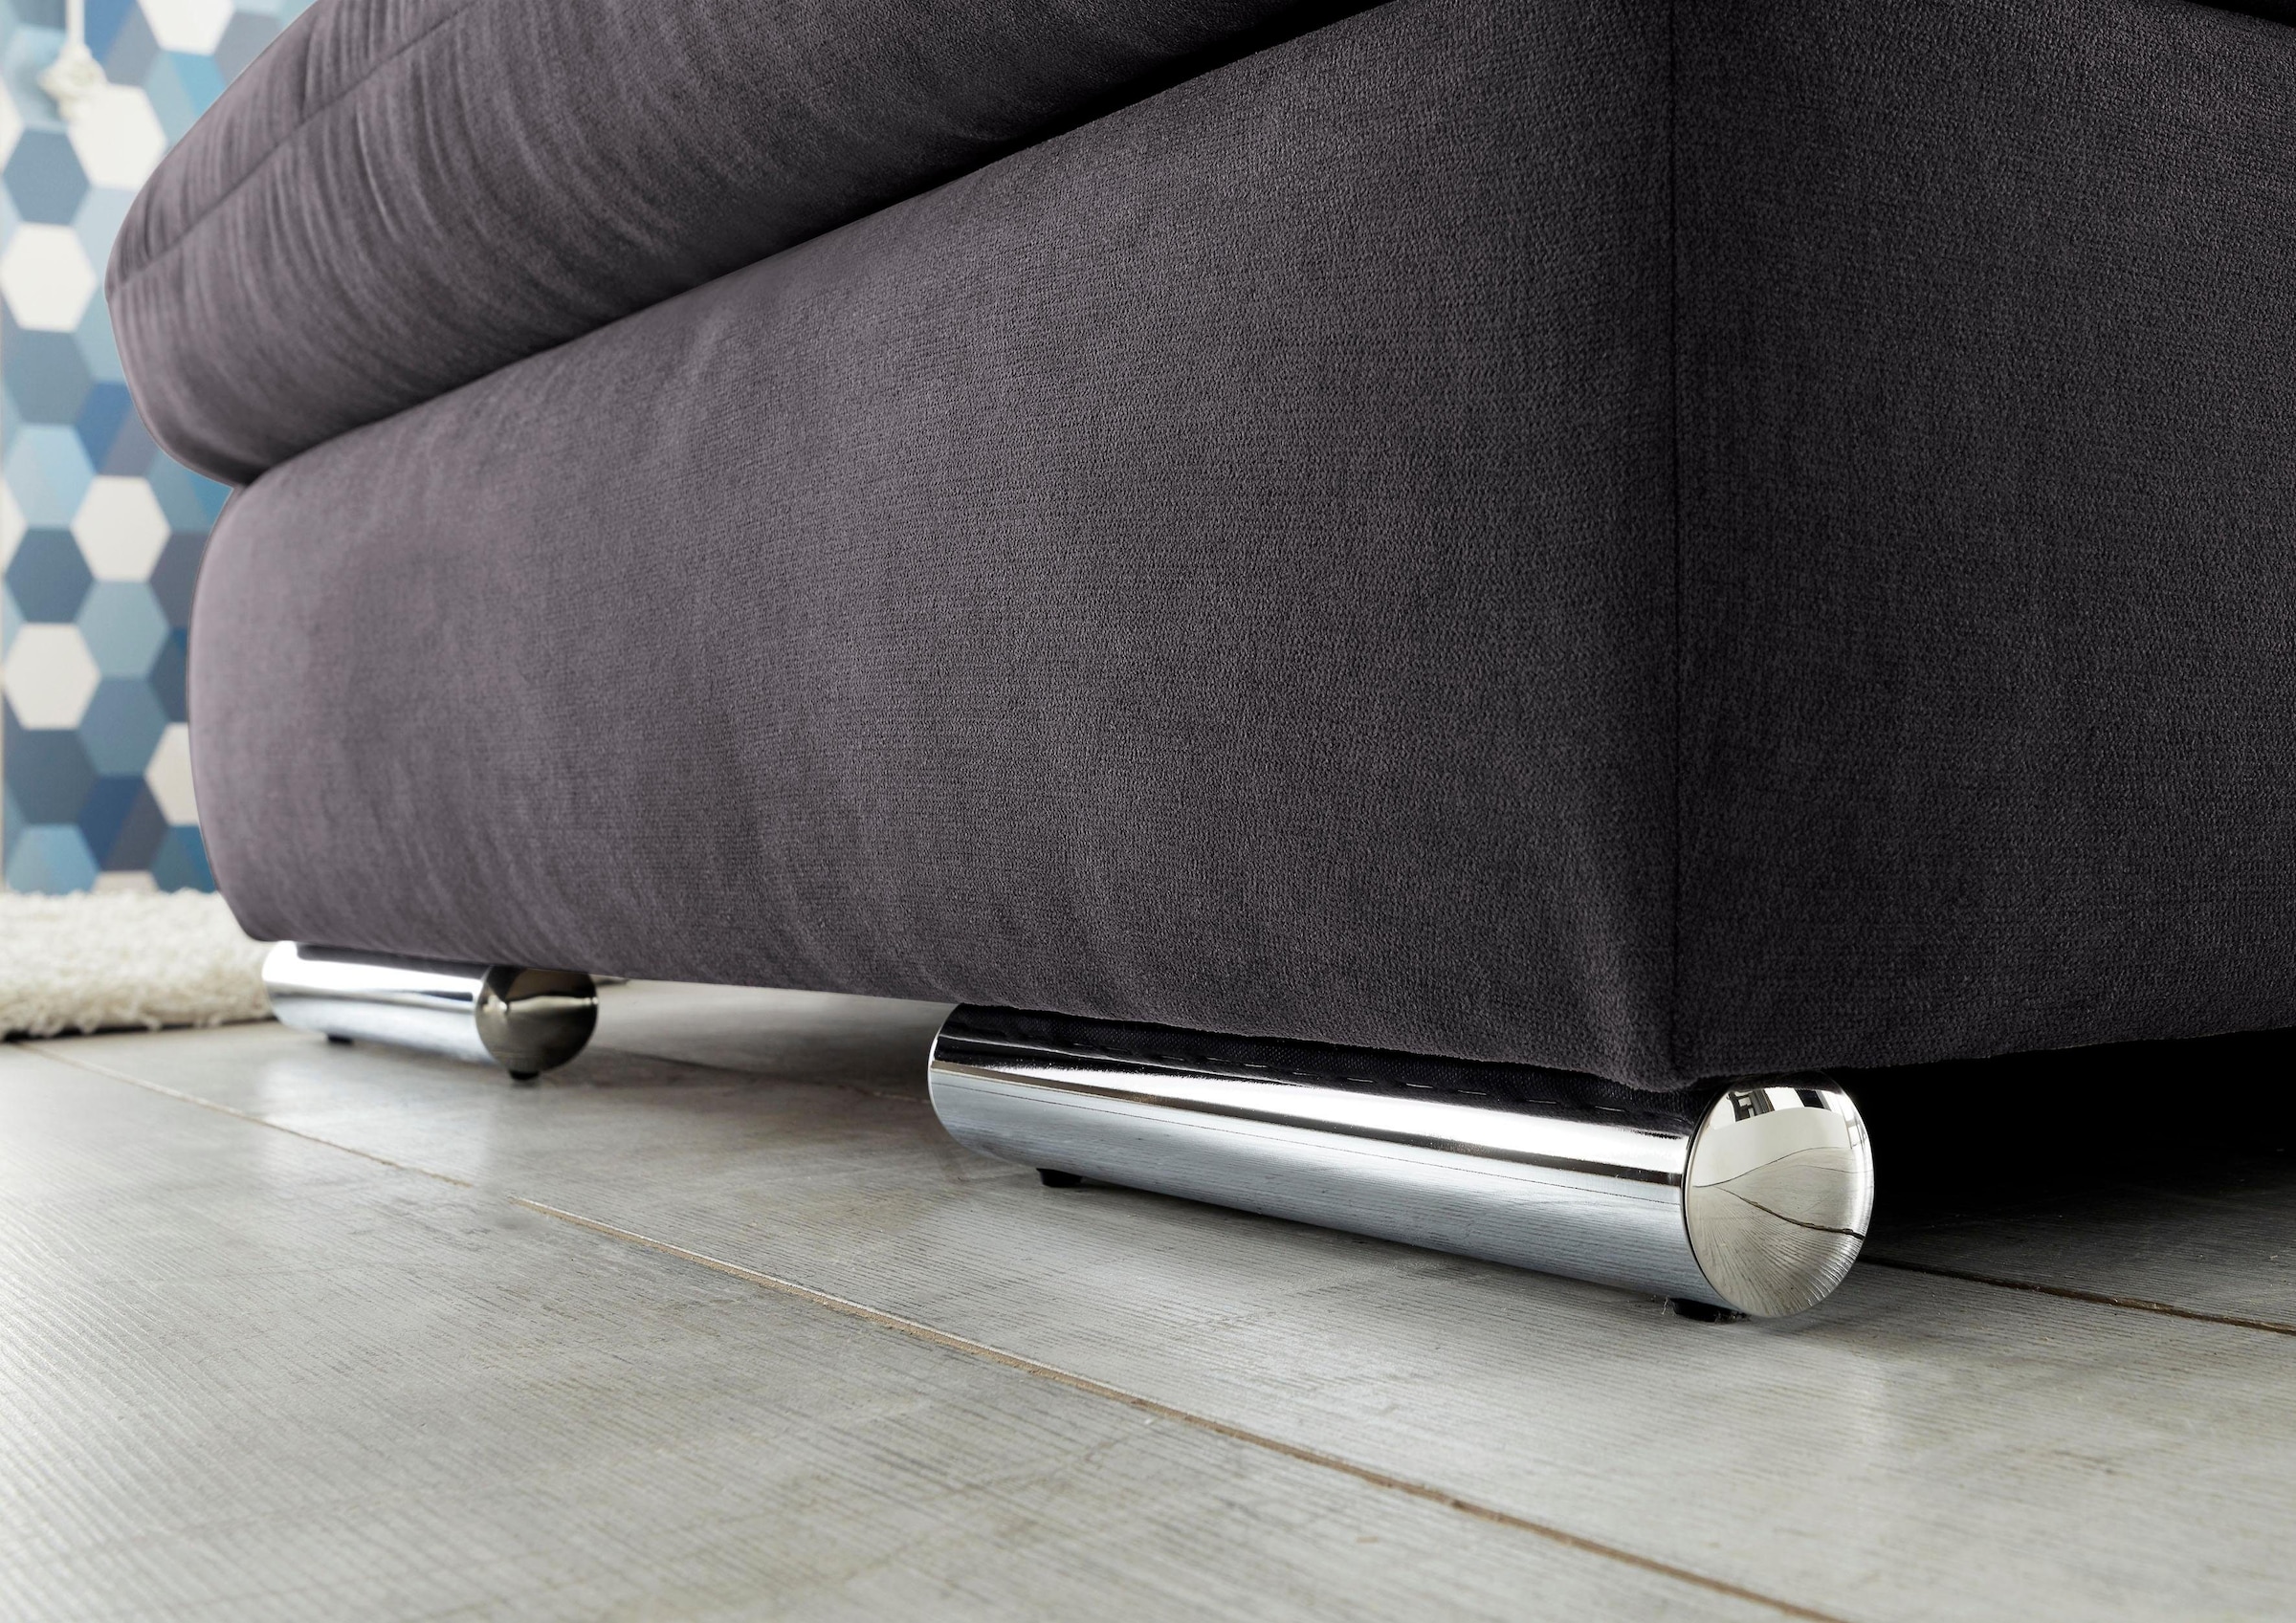 set one by Musterring Ecksofa »SO 4100«, wahlweise mit Bettfunktion